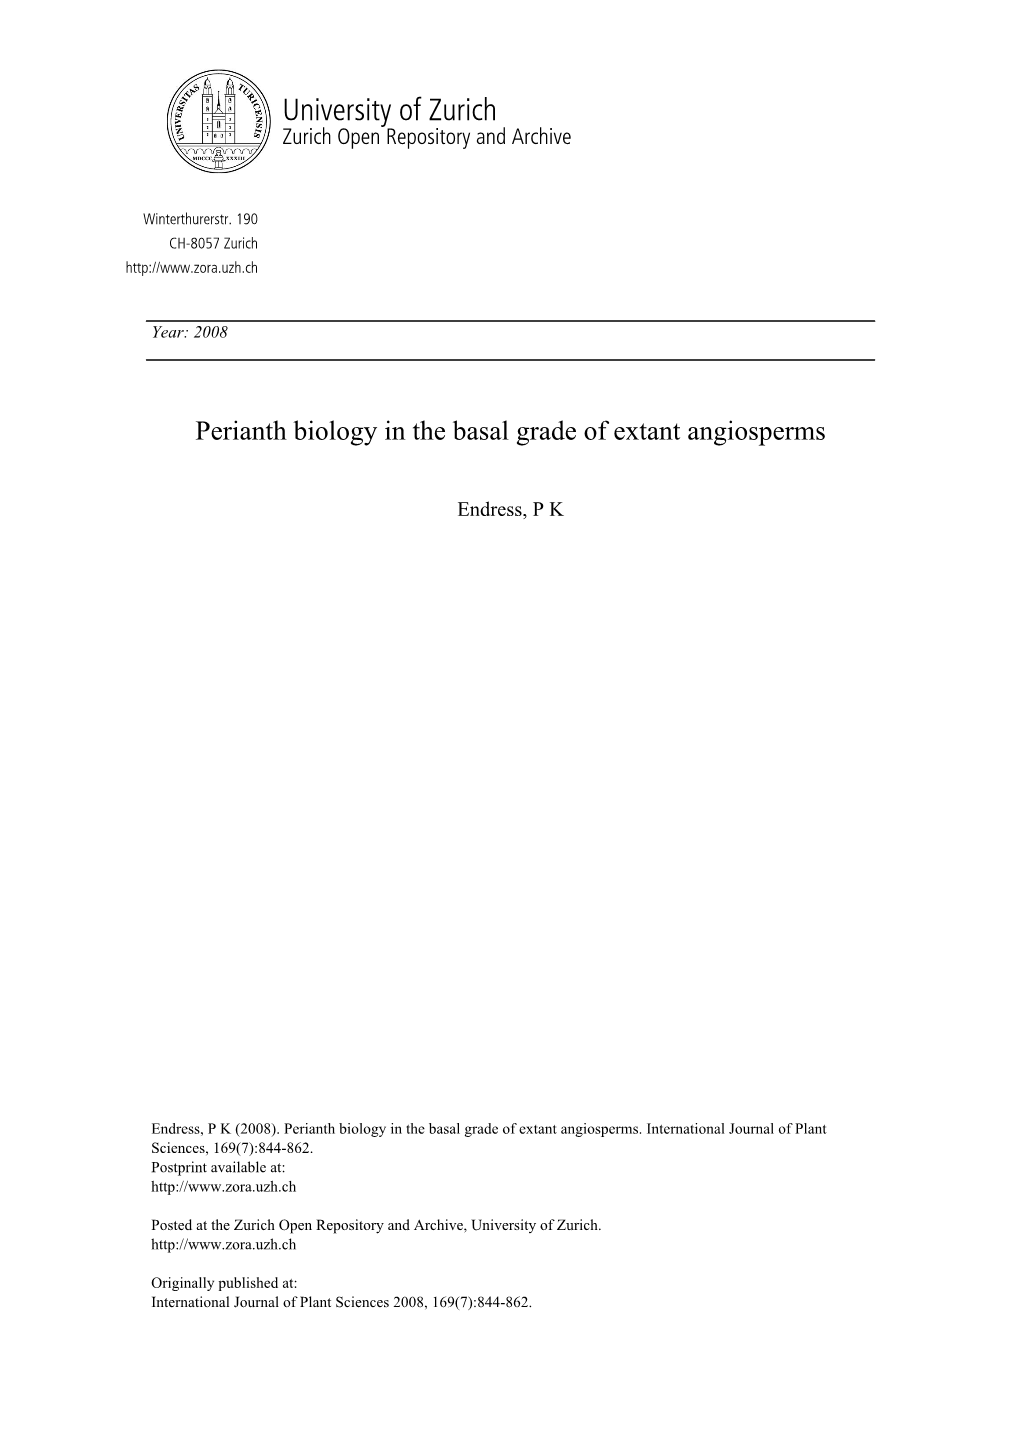 'Perianth Biology in the Basal Grade of Extant Angiosperms'